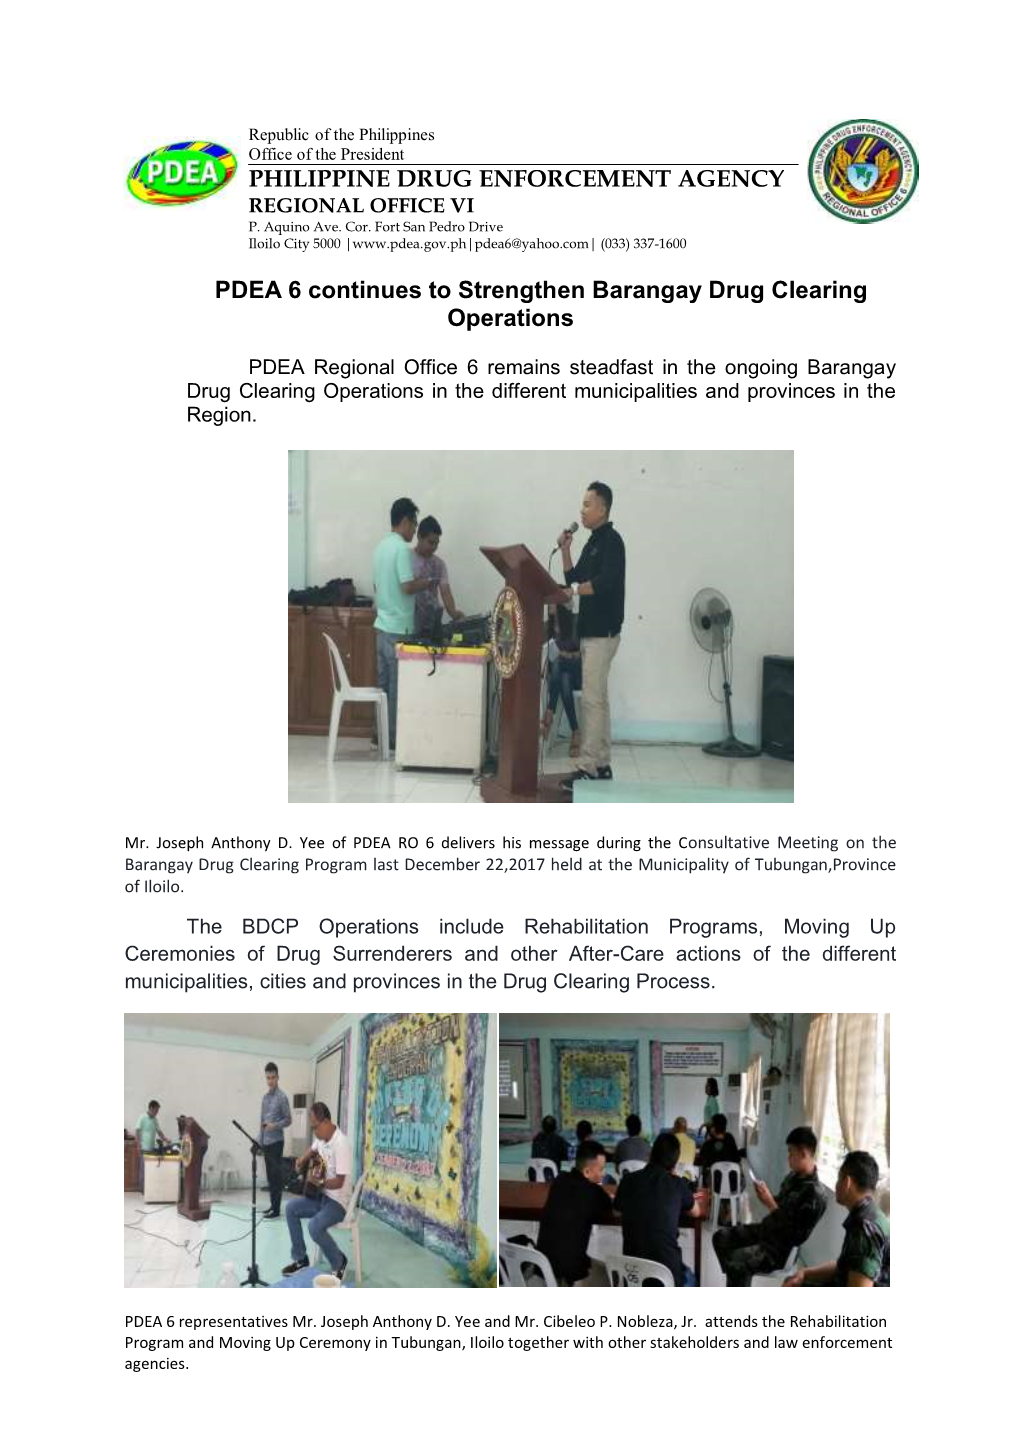 PHILIPPINE DRUG ENFORCEMENT AGENCY PDEA 6 Continues To